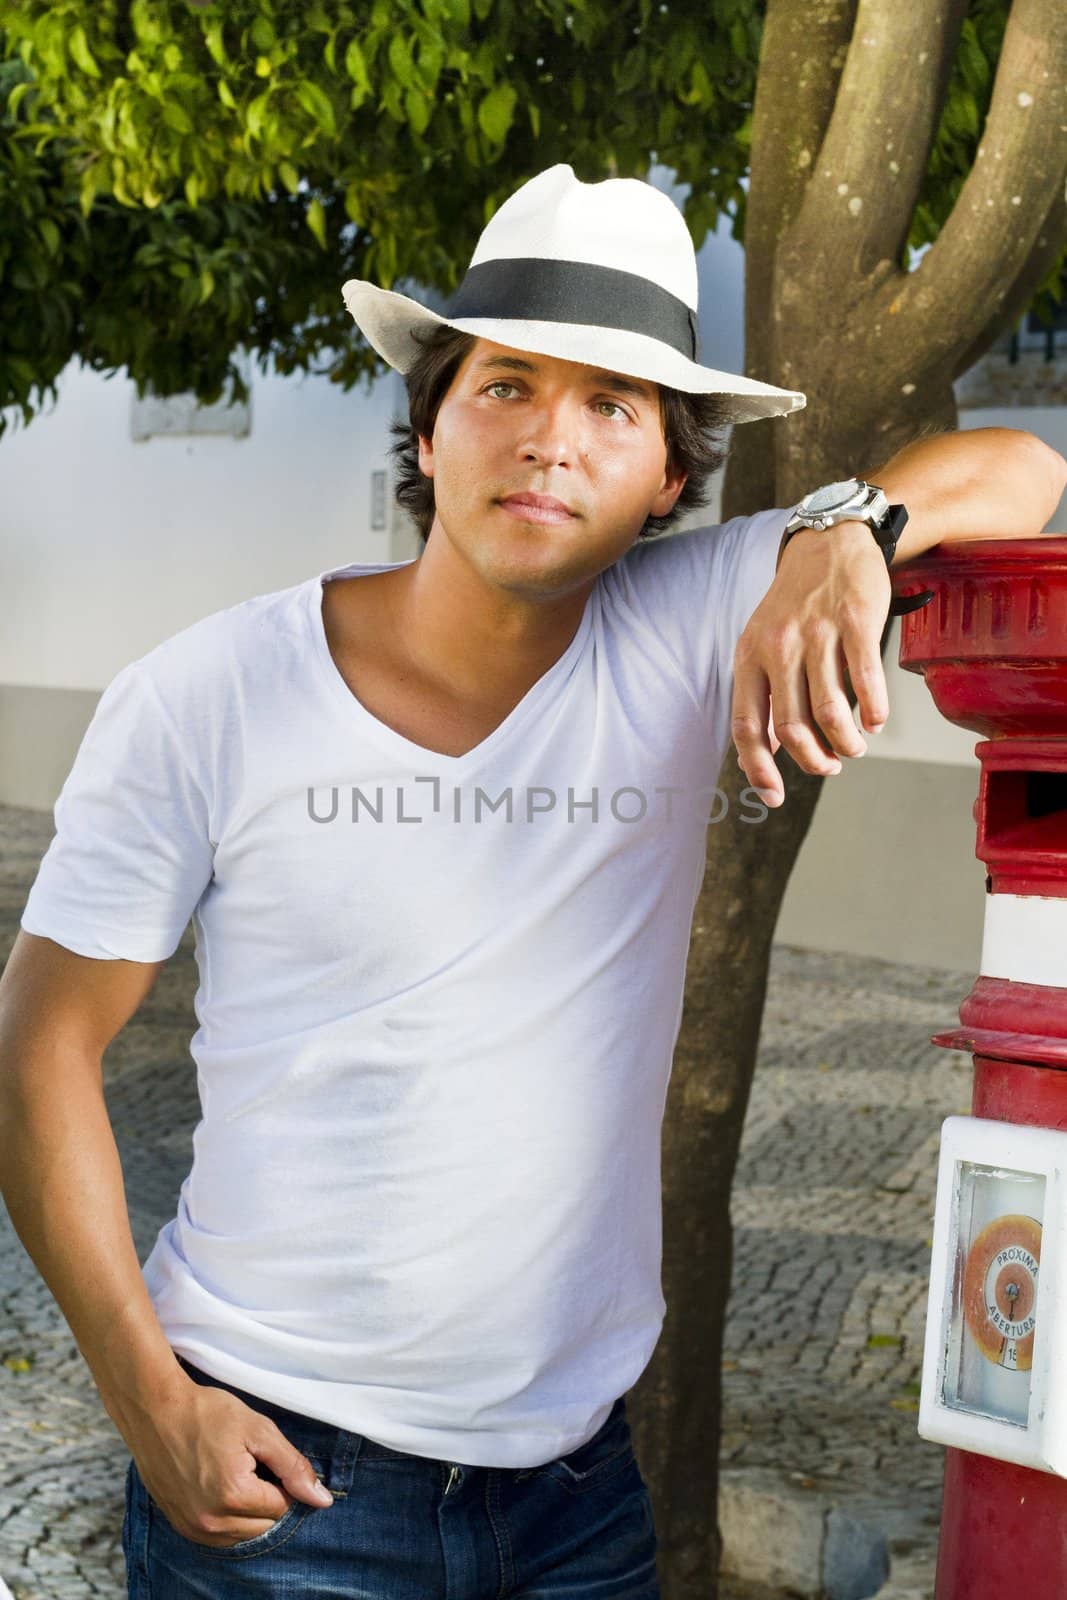 View of a handsome man with white shirt and hat on a urban city.